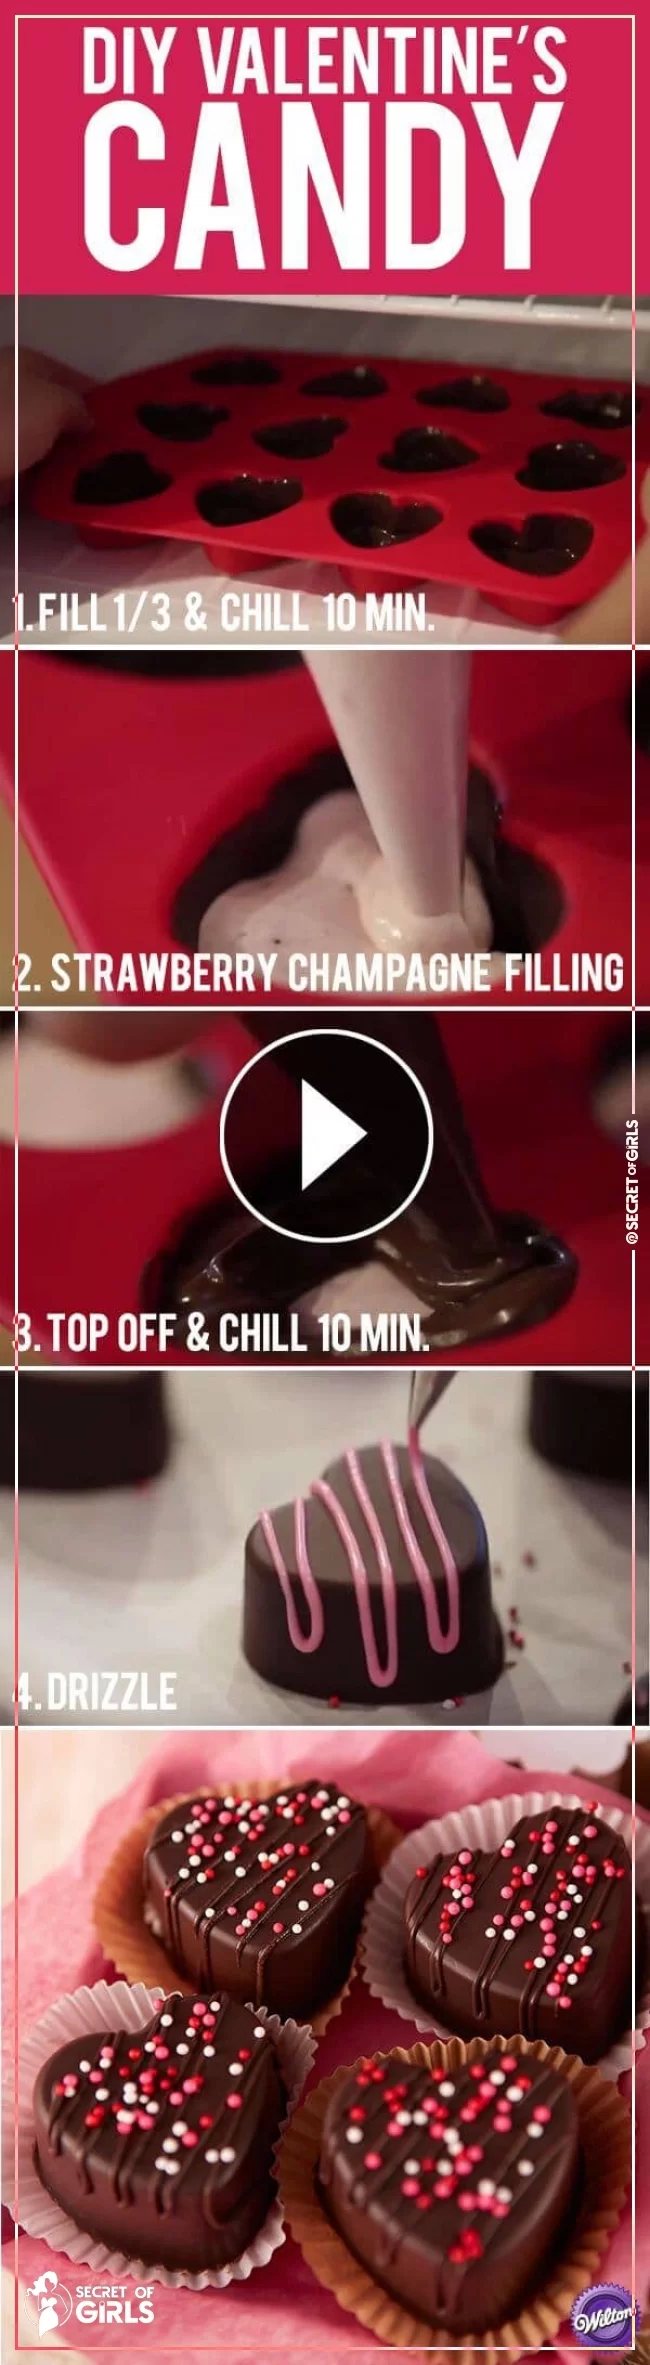 Delicious Homemade Strawberry Champagne Chocolates | 29 Adorable Valentine’s Day Candy Ideas